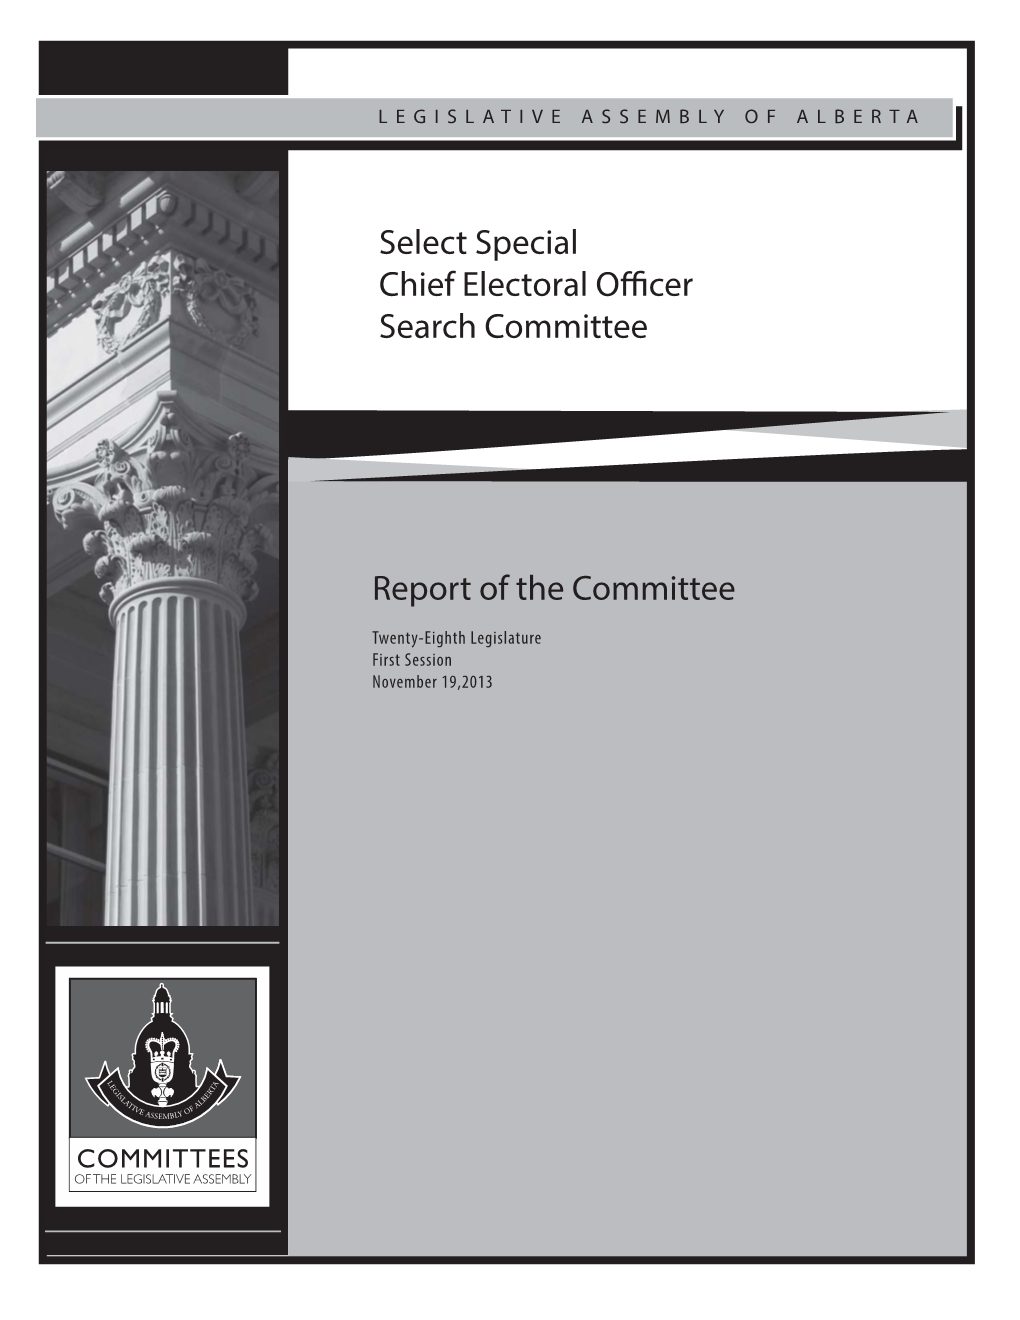 Select Special Chief Electoral Officer Search Committee